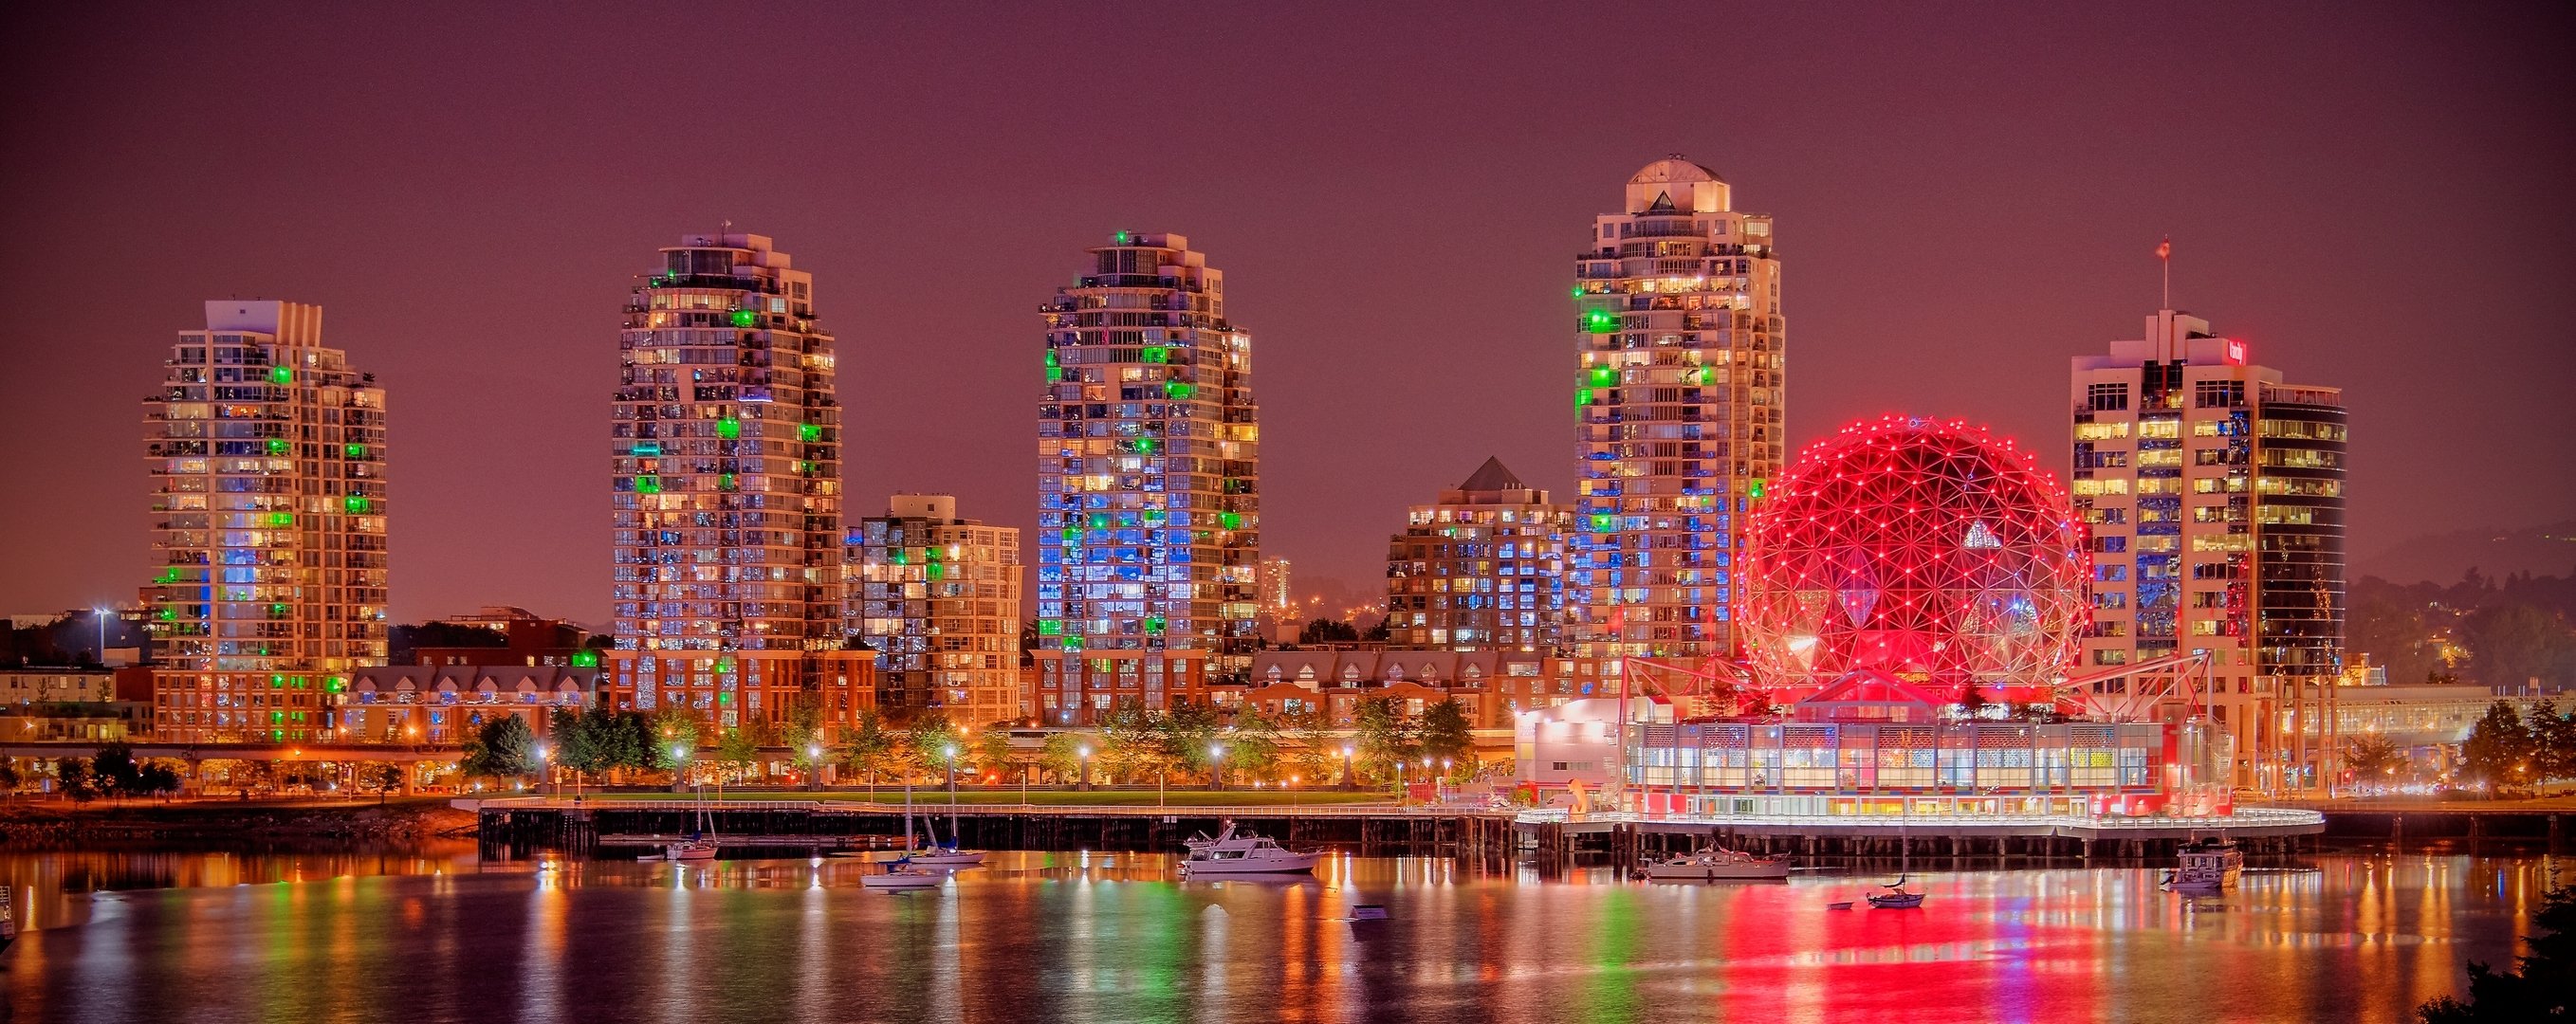 canada, Houses, Night, Waterfront, Vancouver, British, Columbia, Burrard, Inlet, Cities Wallpaper